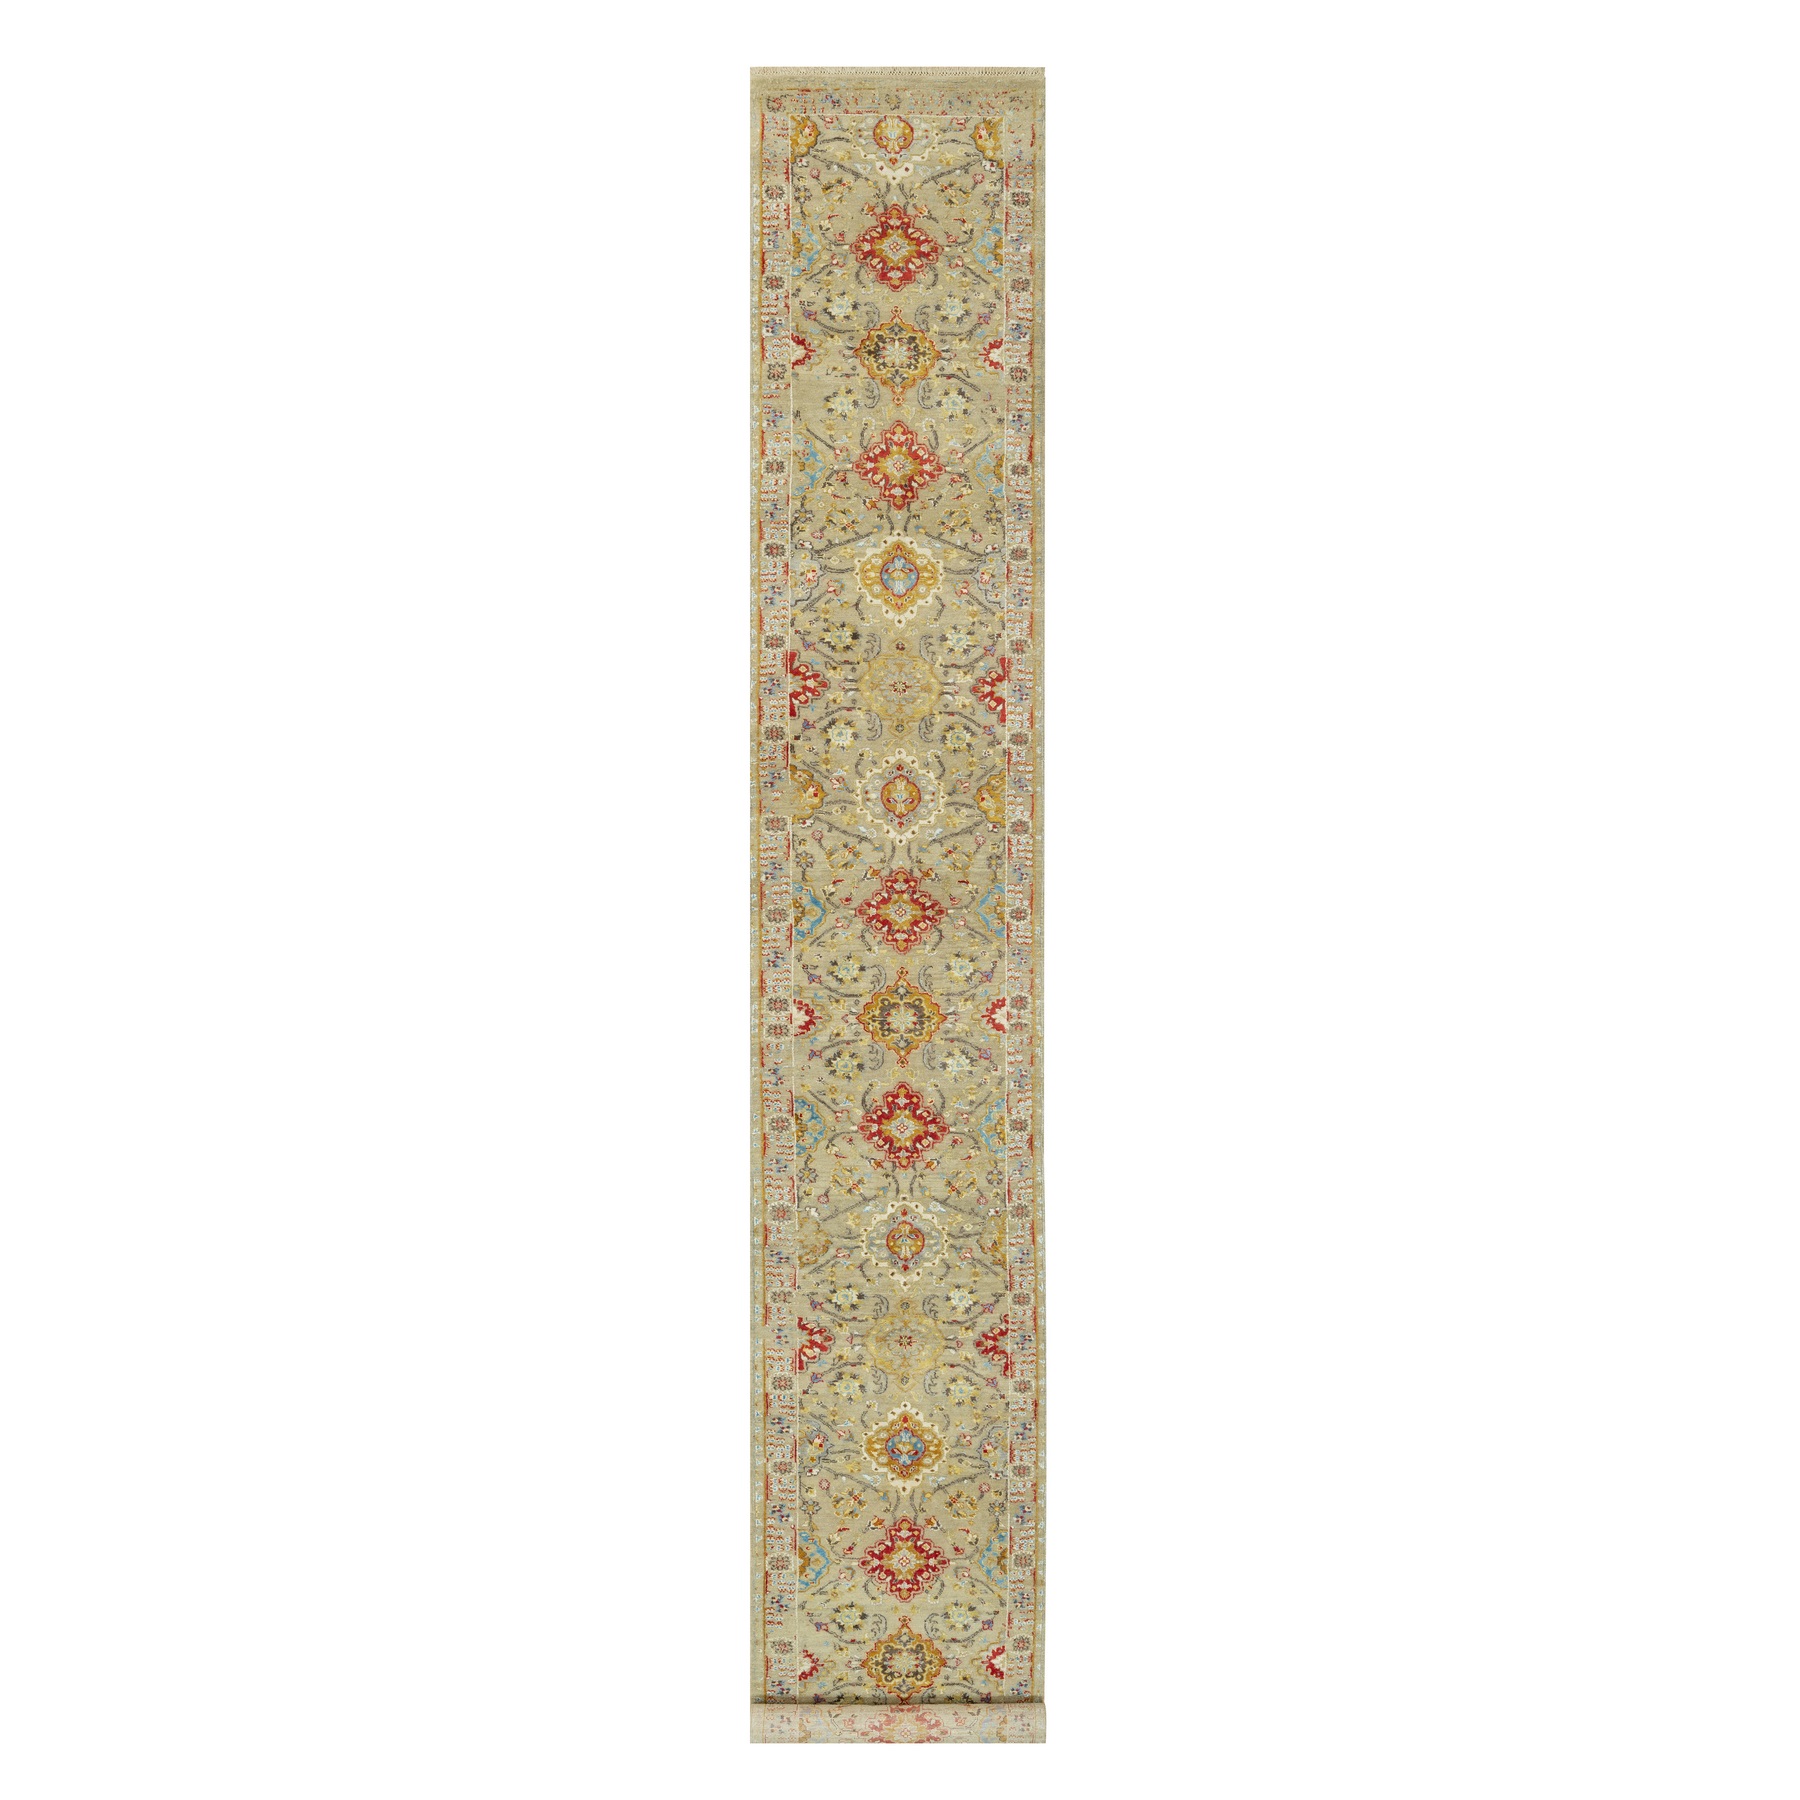 Transitional Rugs LUV814770